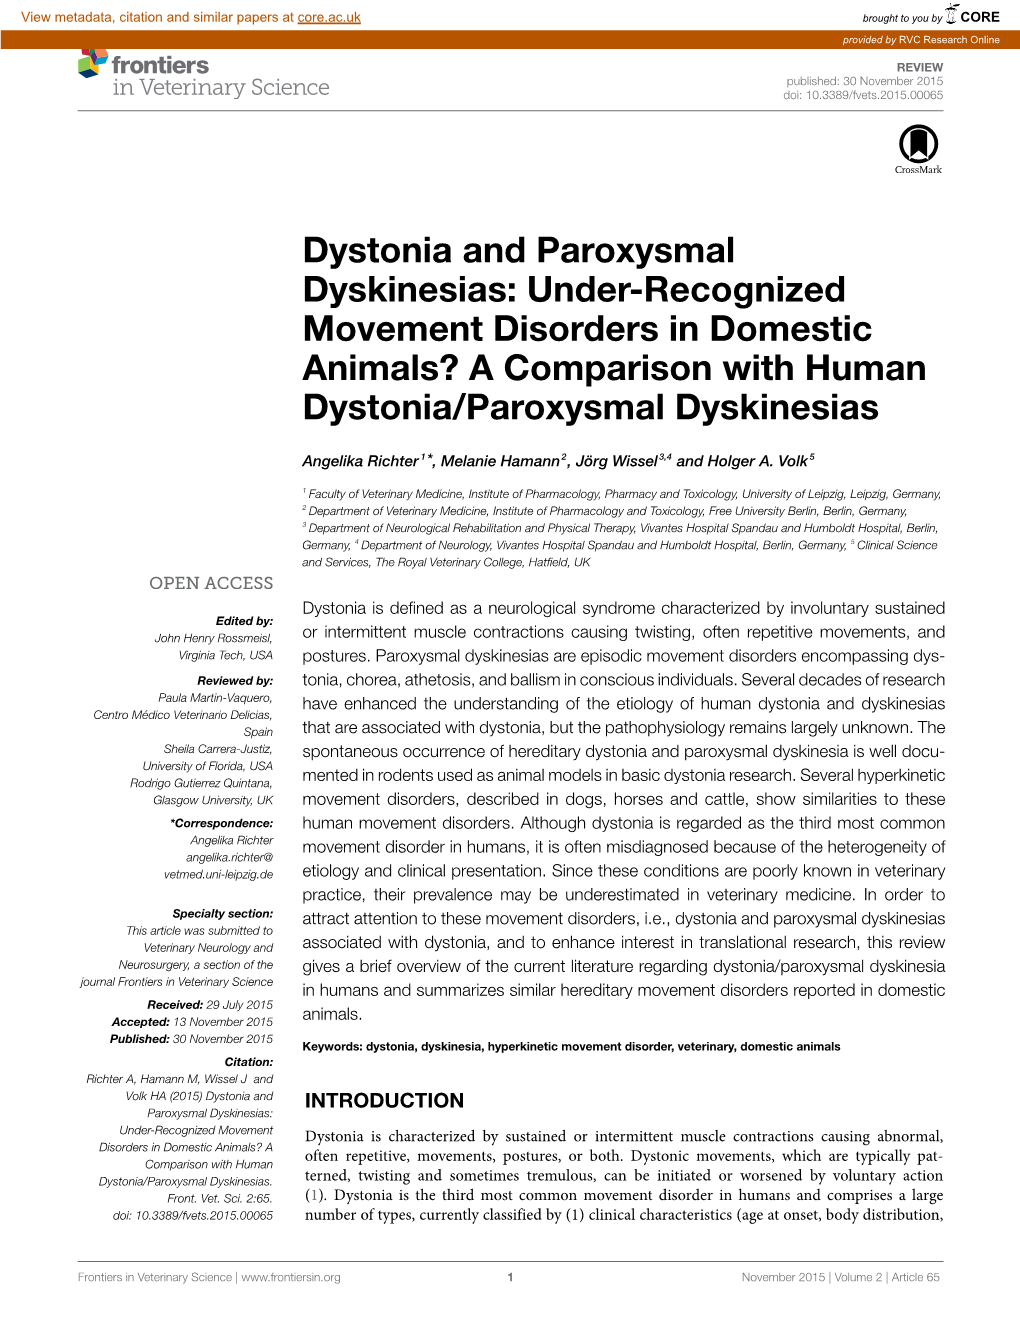 Dystonia and Paroxysmal Dyskinesias: Under-Recognized Movement Disorders in Domestic Animals? a Comparison with Human Dystonia/Paroxysmal Dyskinesias